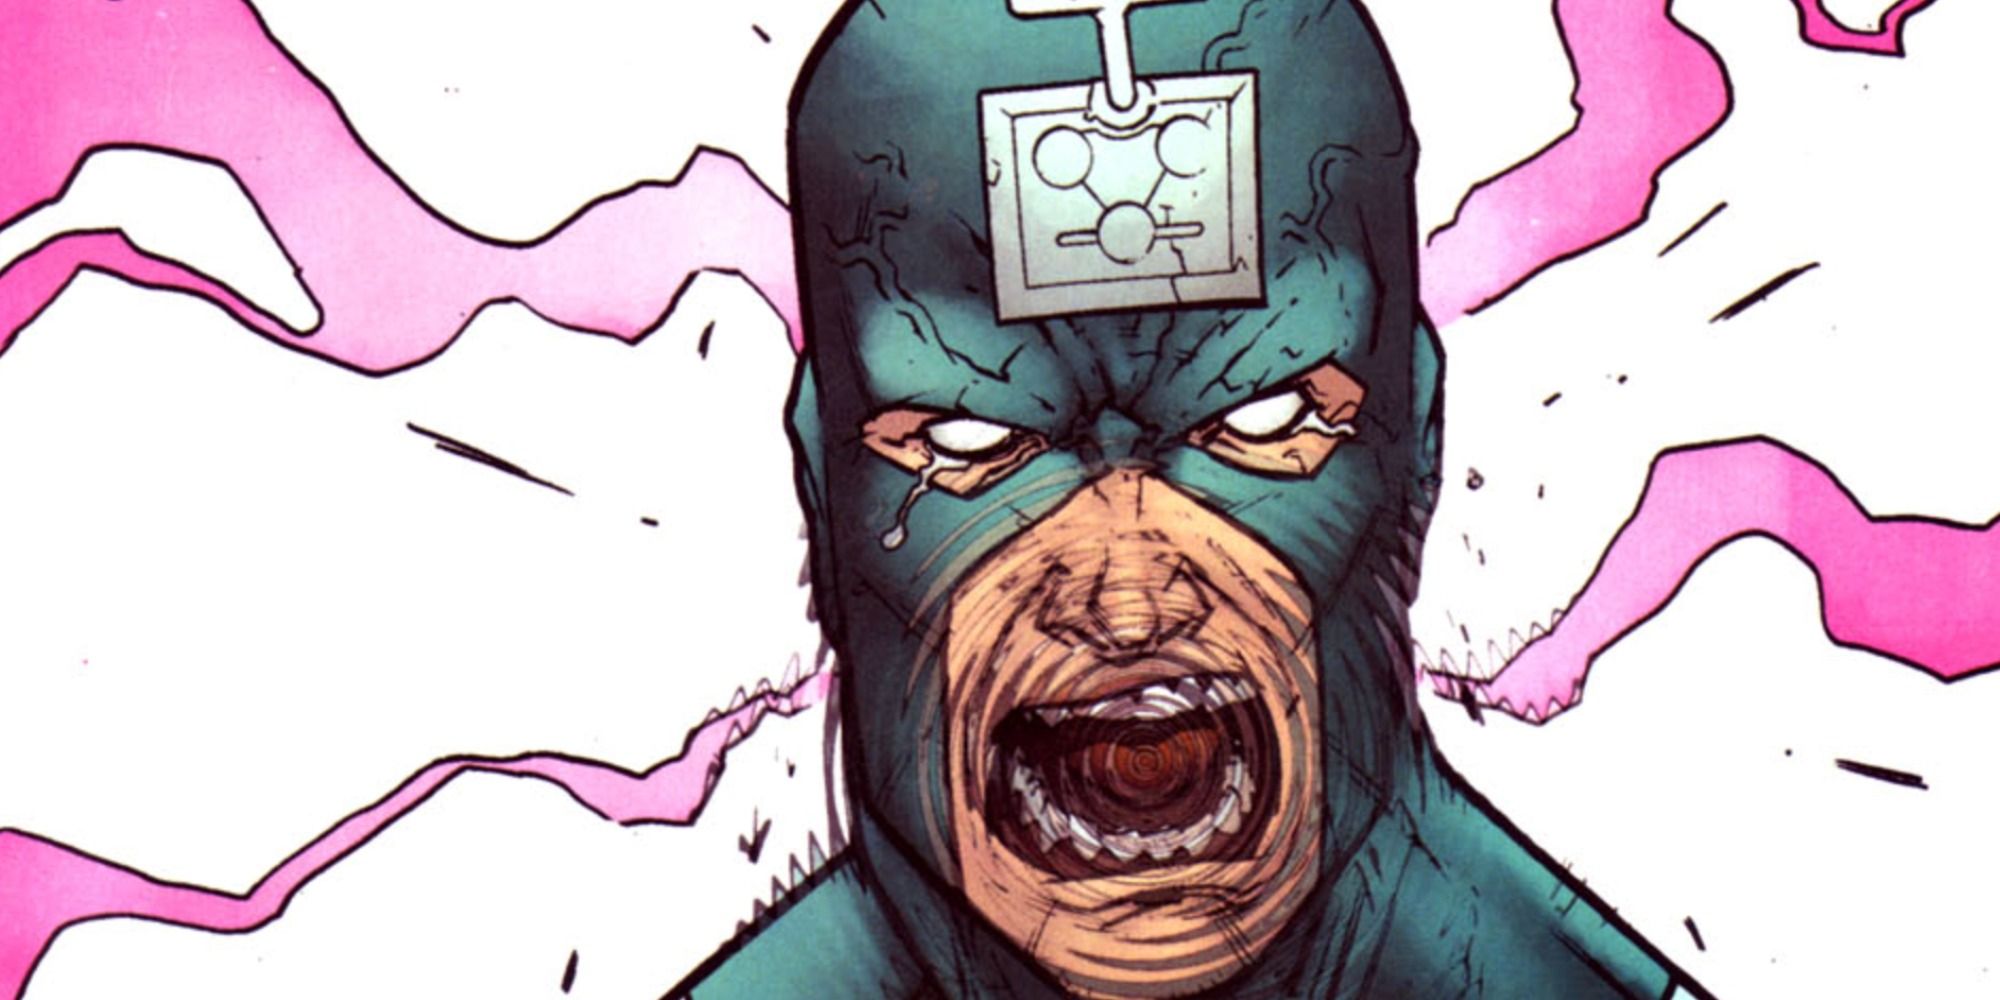 Black Bolt uses his power in Marvel Comics.